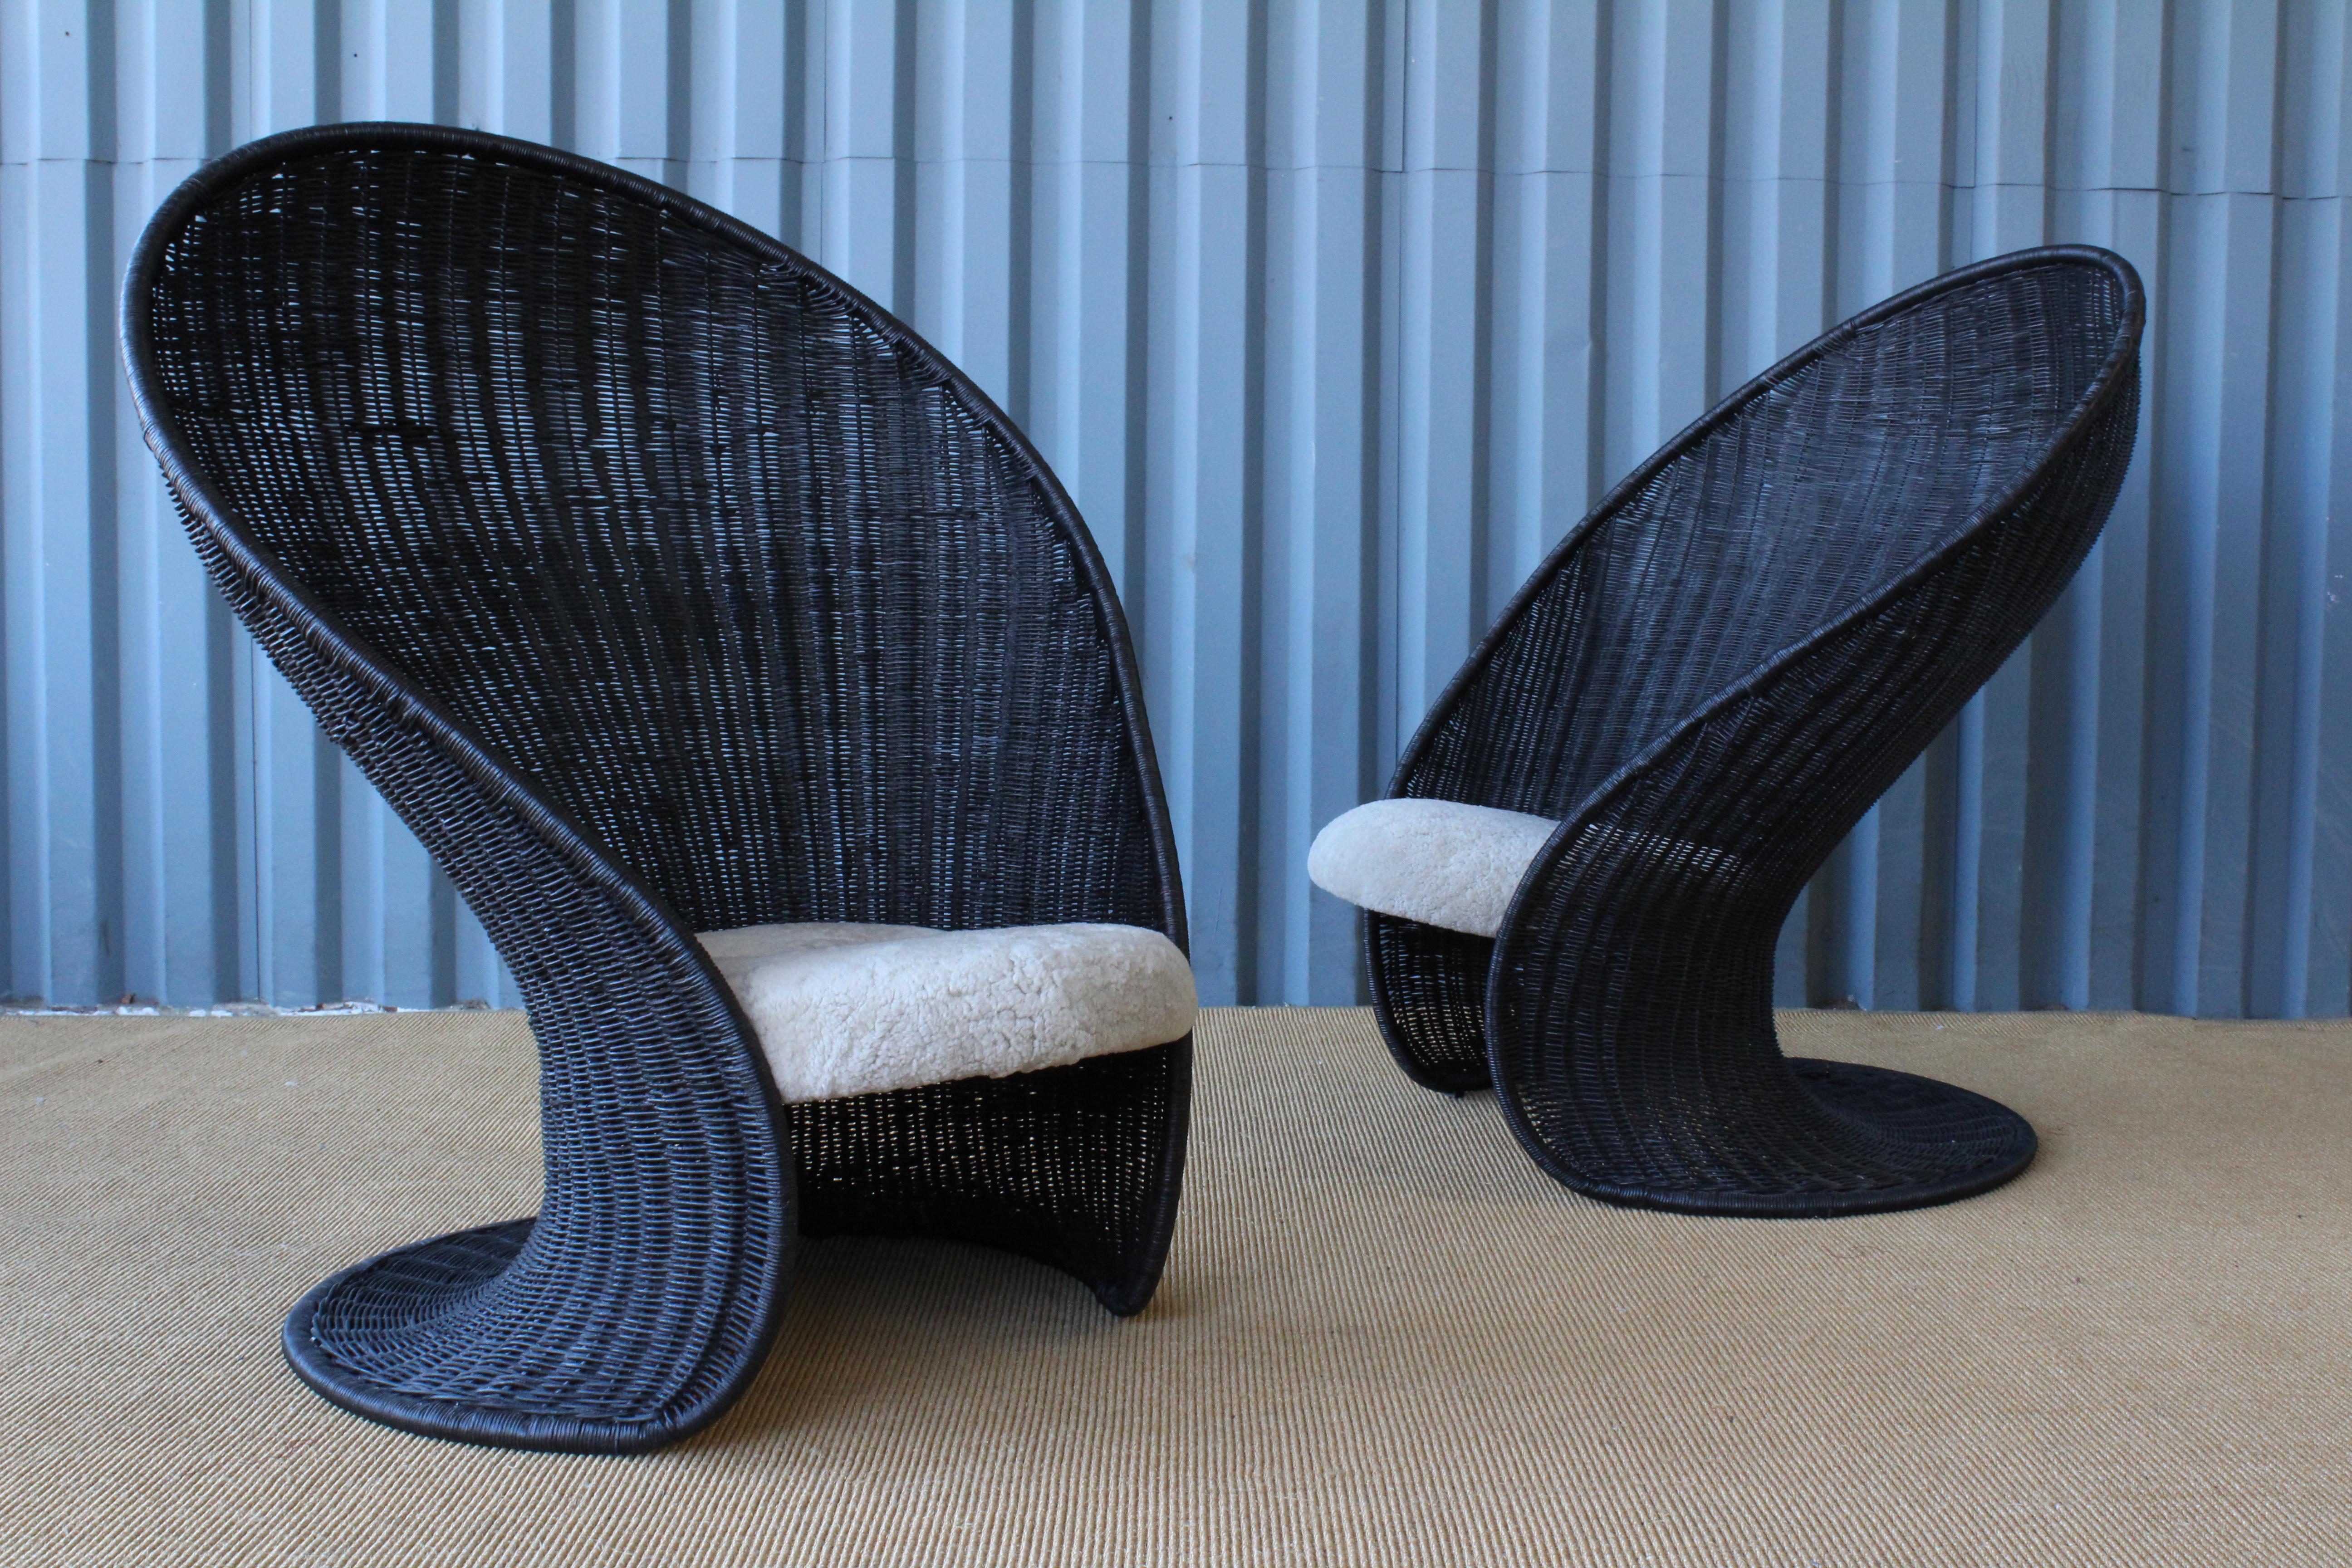 Mid-century wicker 'Foglia' chair by Giovanni Travasa for Bonacina, Italy, 1965. Pair available, sold individually. We've had these chairs completely redone and recovered in an off white shearling. Wicker finish is in a dark brown, almost black.